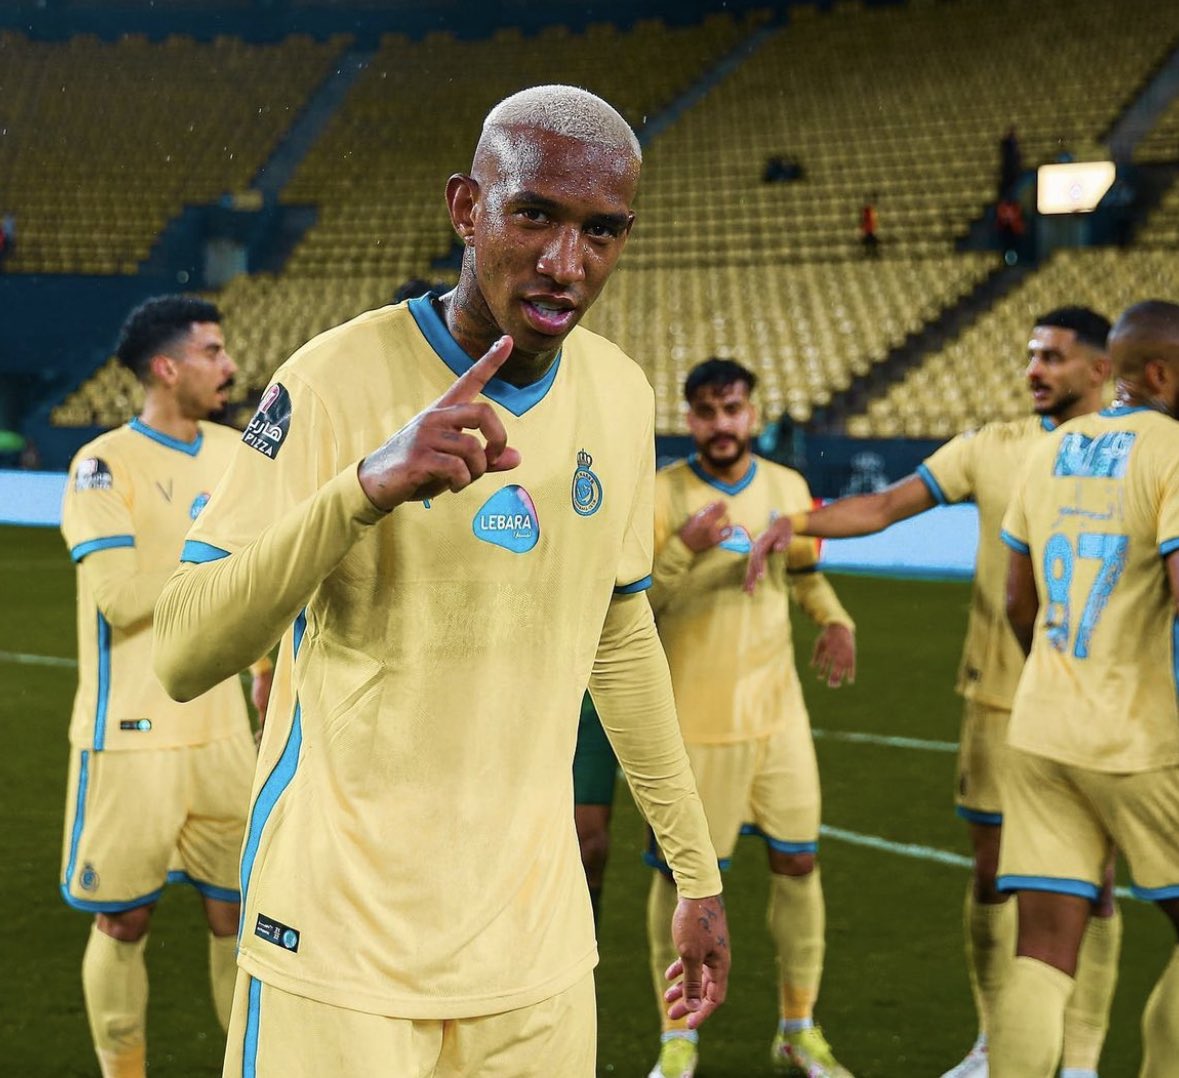 There are no concrete negotiations for Anderson Talisca to join Galatasaray, despite rumours. Been told he’s fully focused on Al Nassr at this stage 🔴⛔️🇸🇦🇹🇷 #transfers

Talisca is not negotiating with Gala or any other club, as things stand.